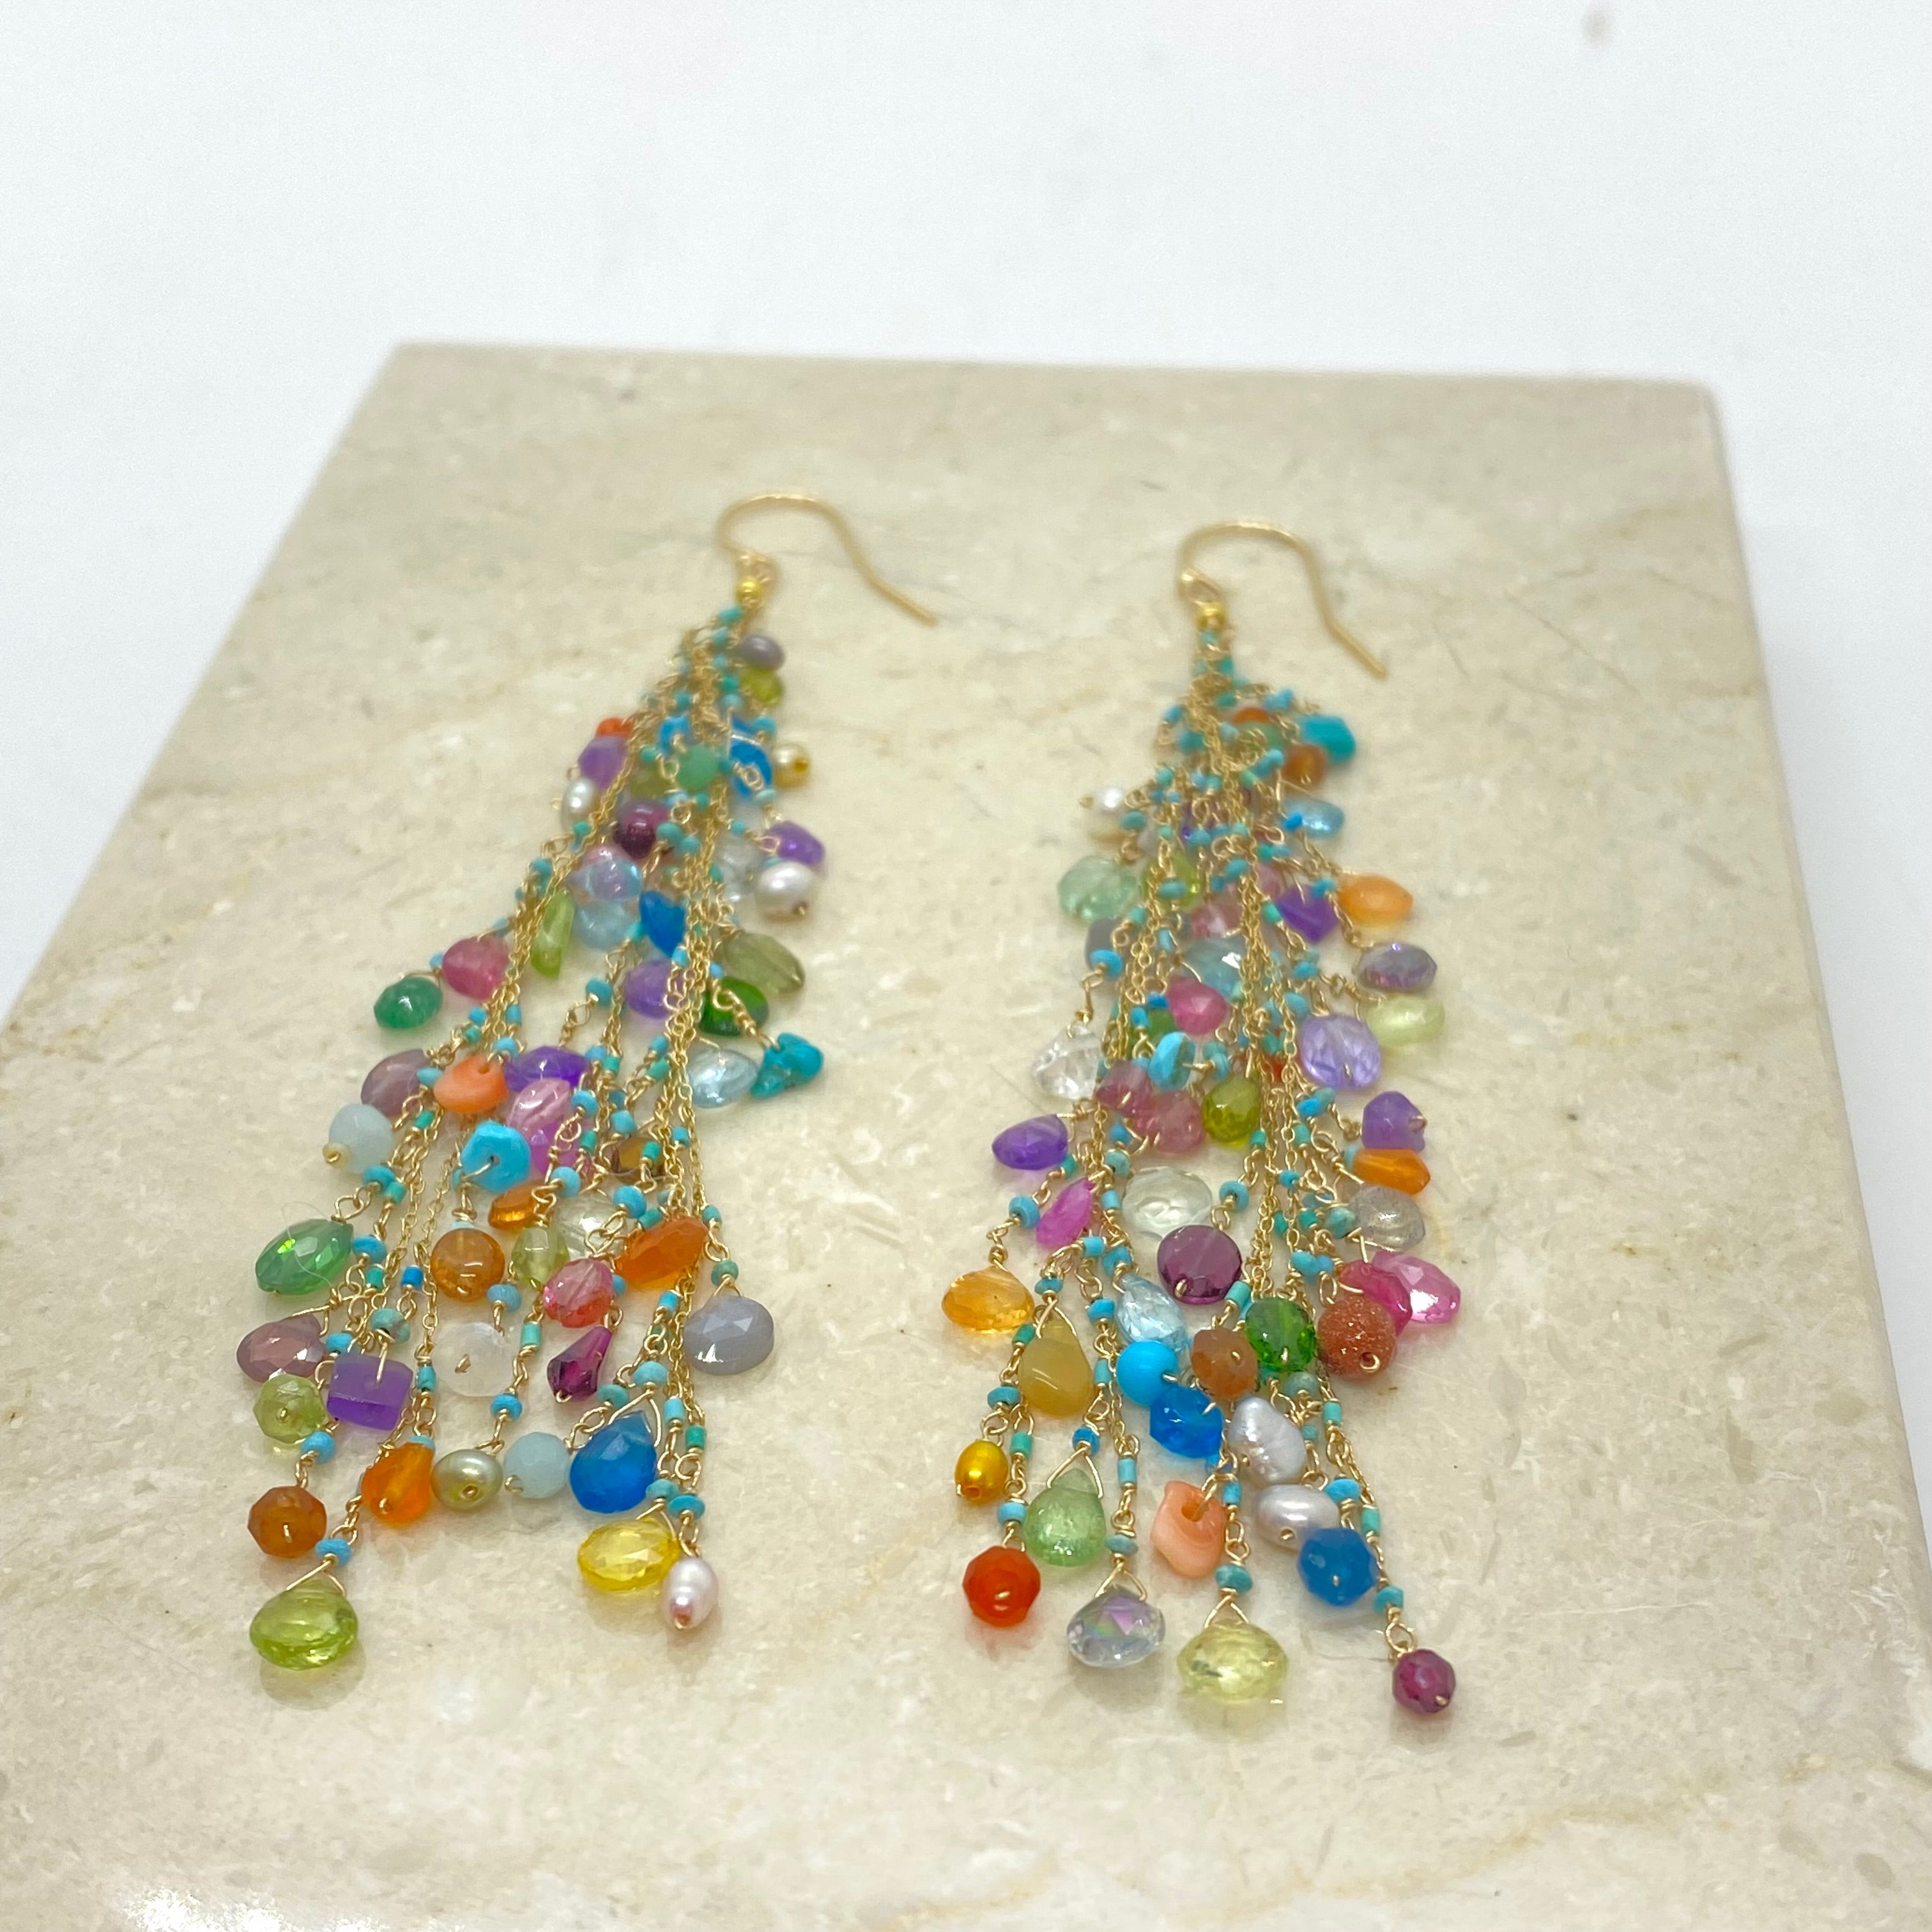 14k Gold Earrings w/ Precious Stones, Semi-Precious Stones, Afghan Turquoise, Freshwater Pearls & 18k Gold Nugget